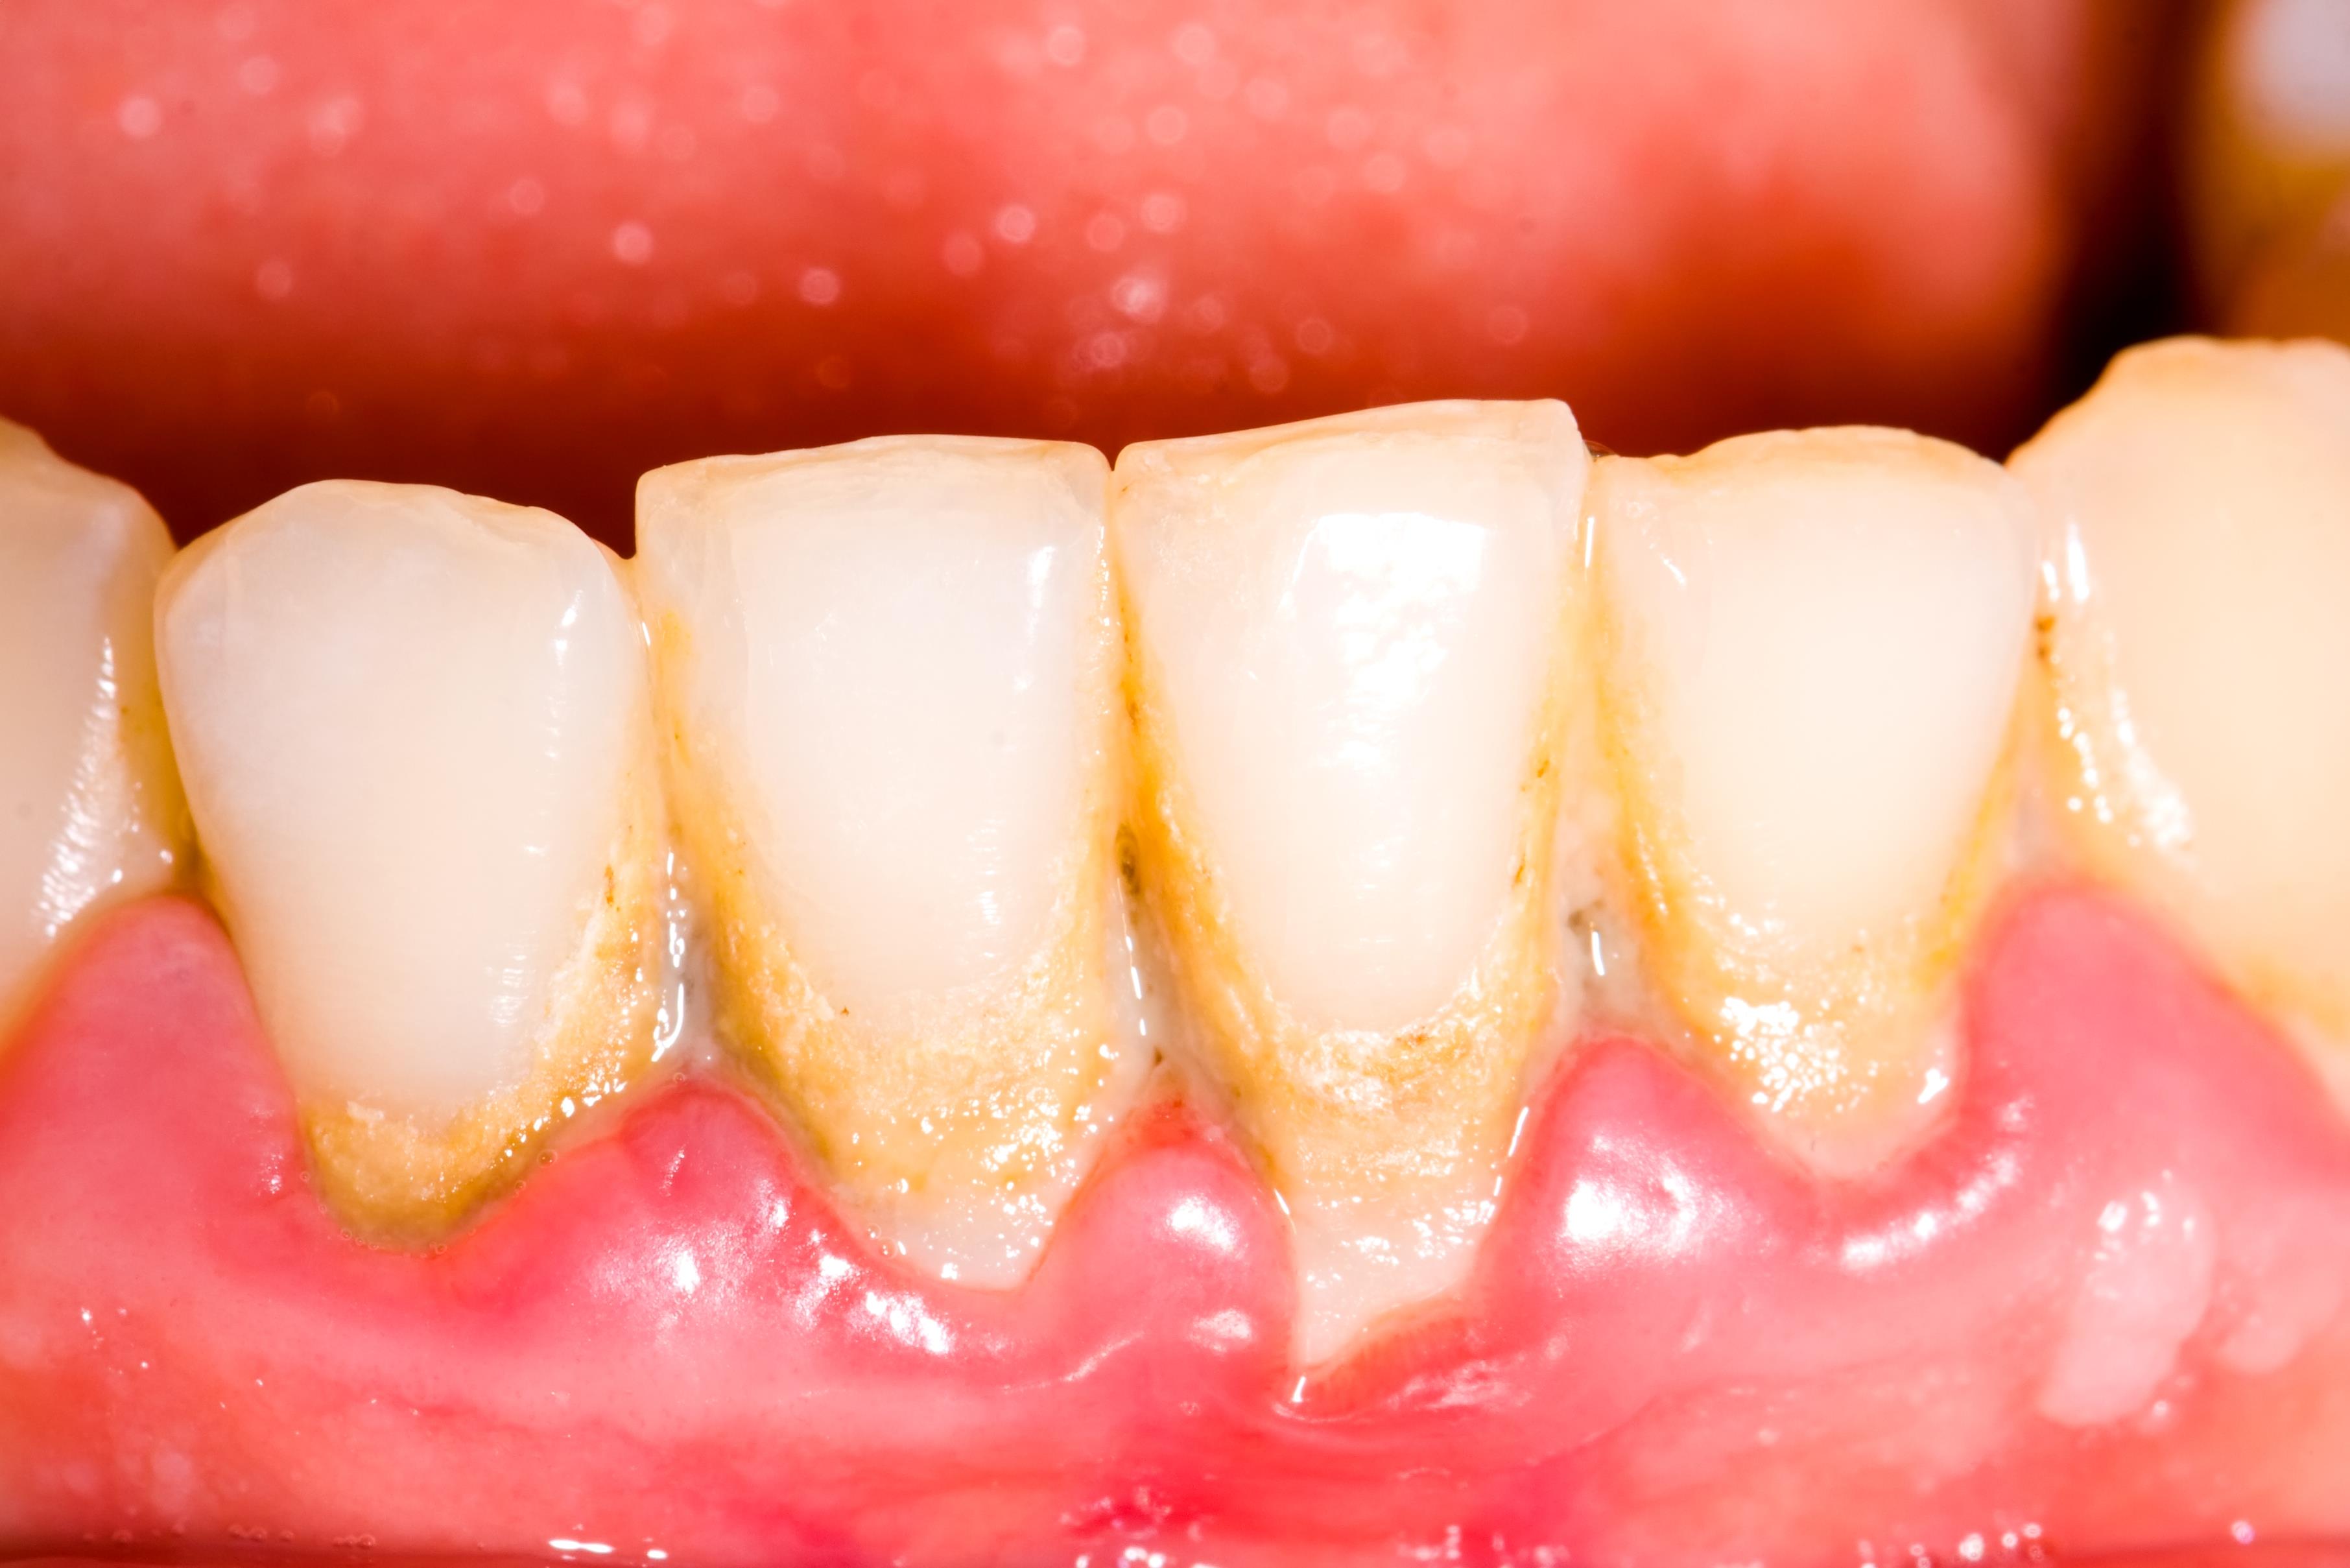 Dental Plaque | What Problems Can it Lead to?